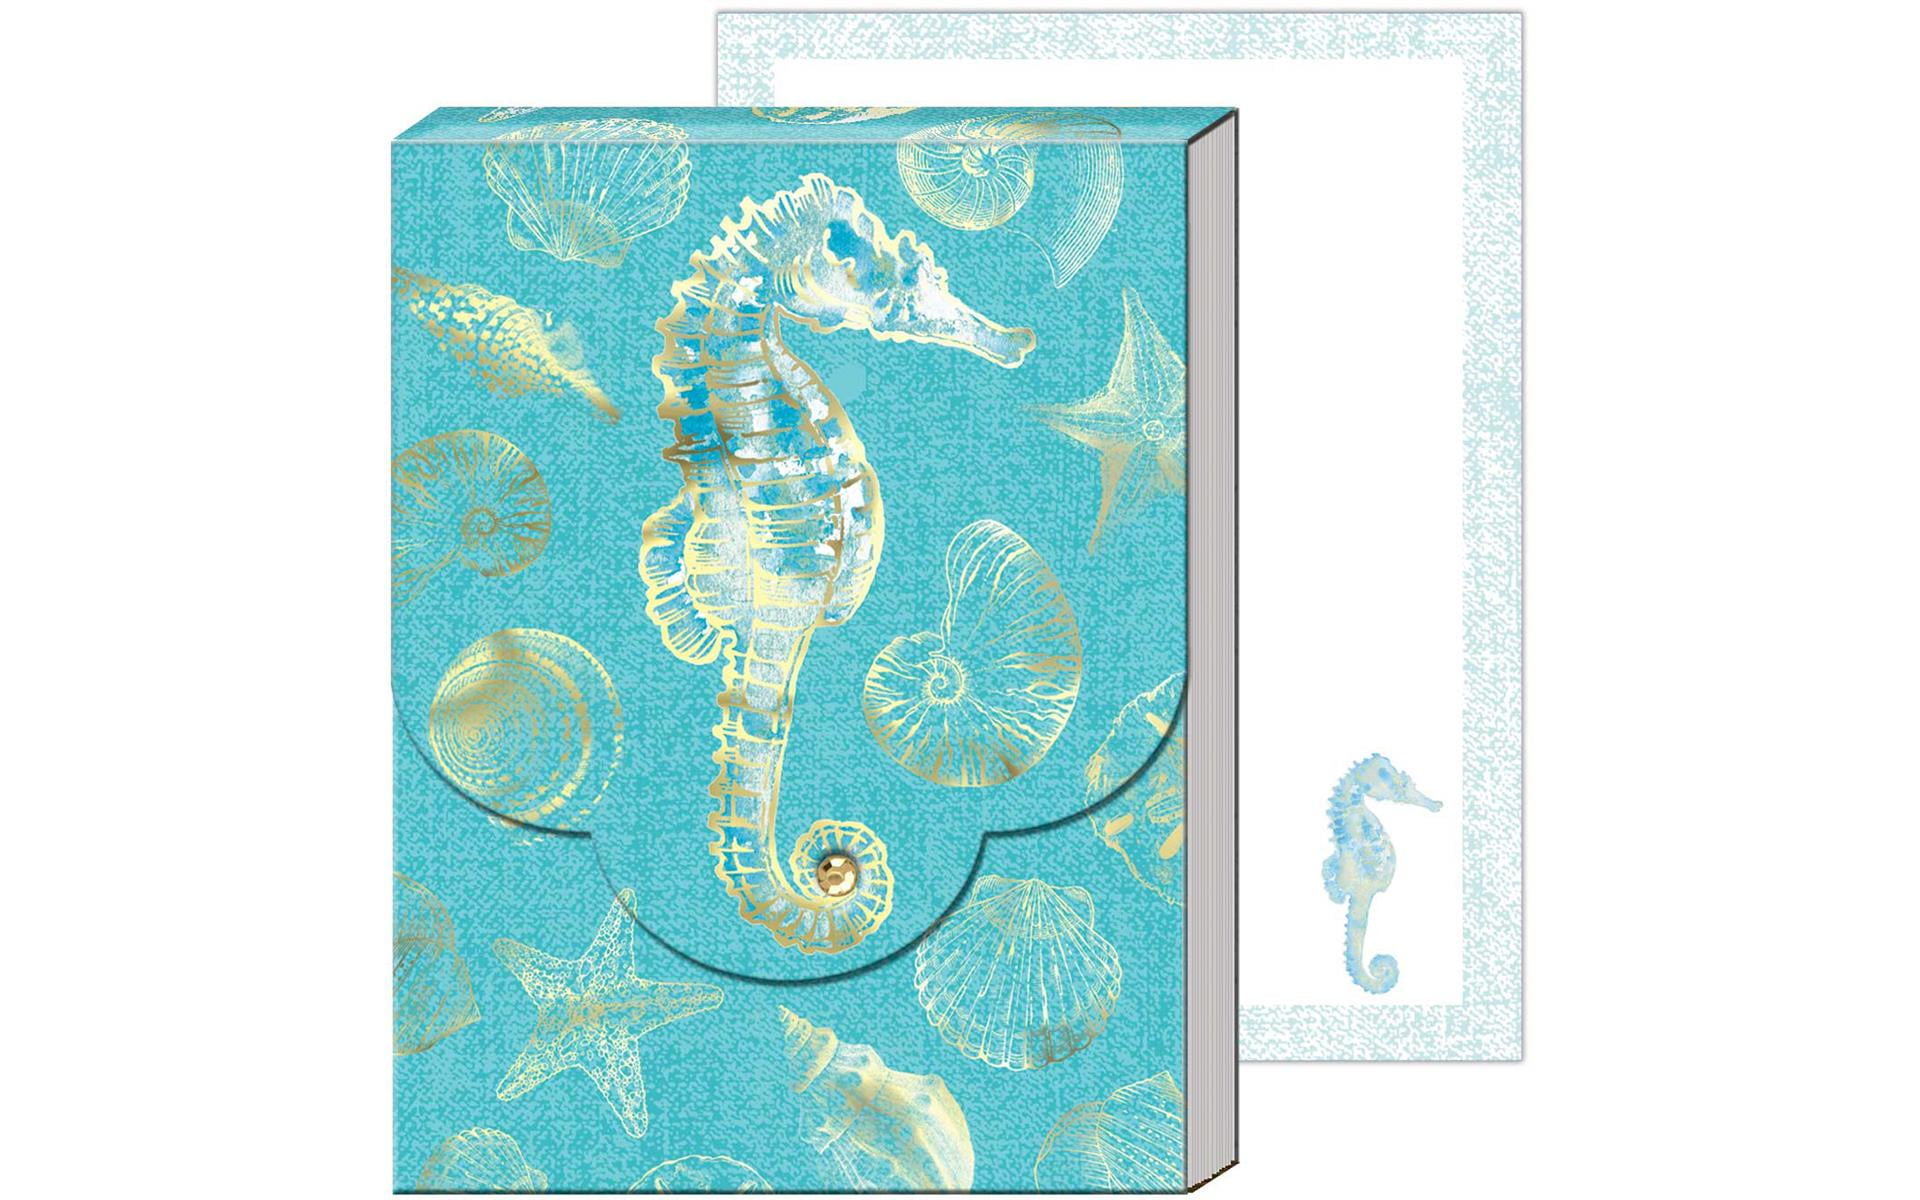 Paisley Dragonflies 43009 for sale online Punch Studio Large Sticky Note Pad Portfolios 